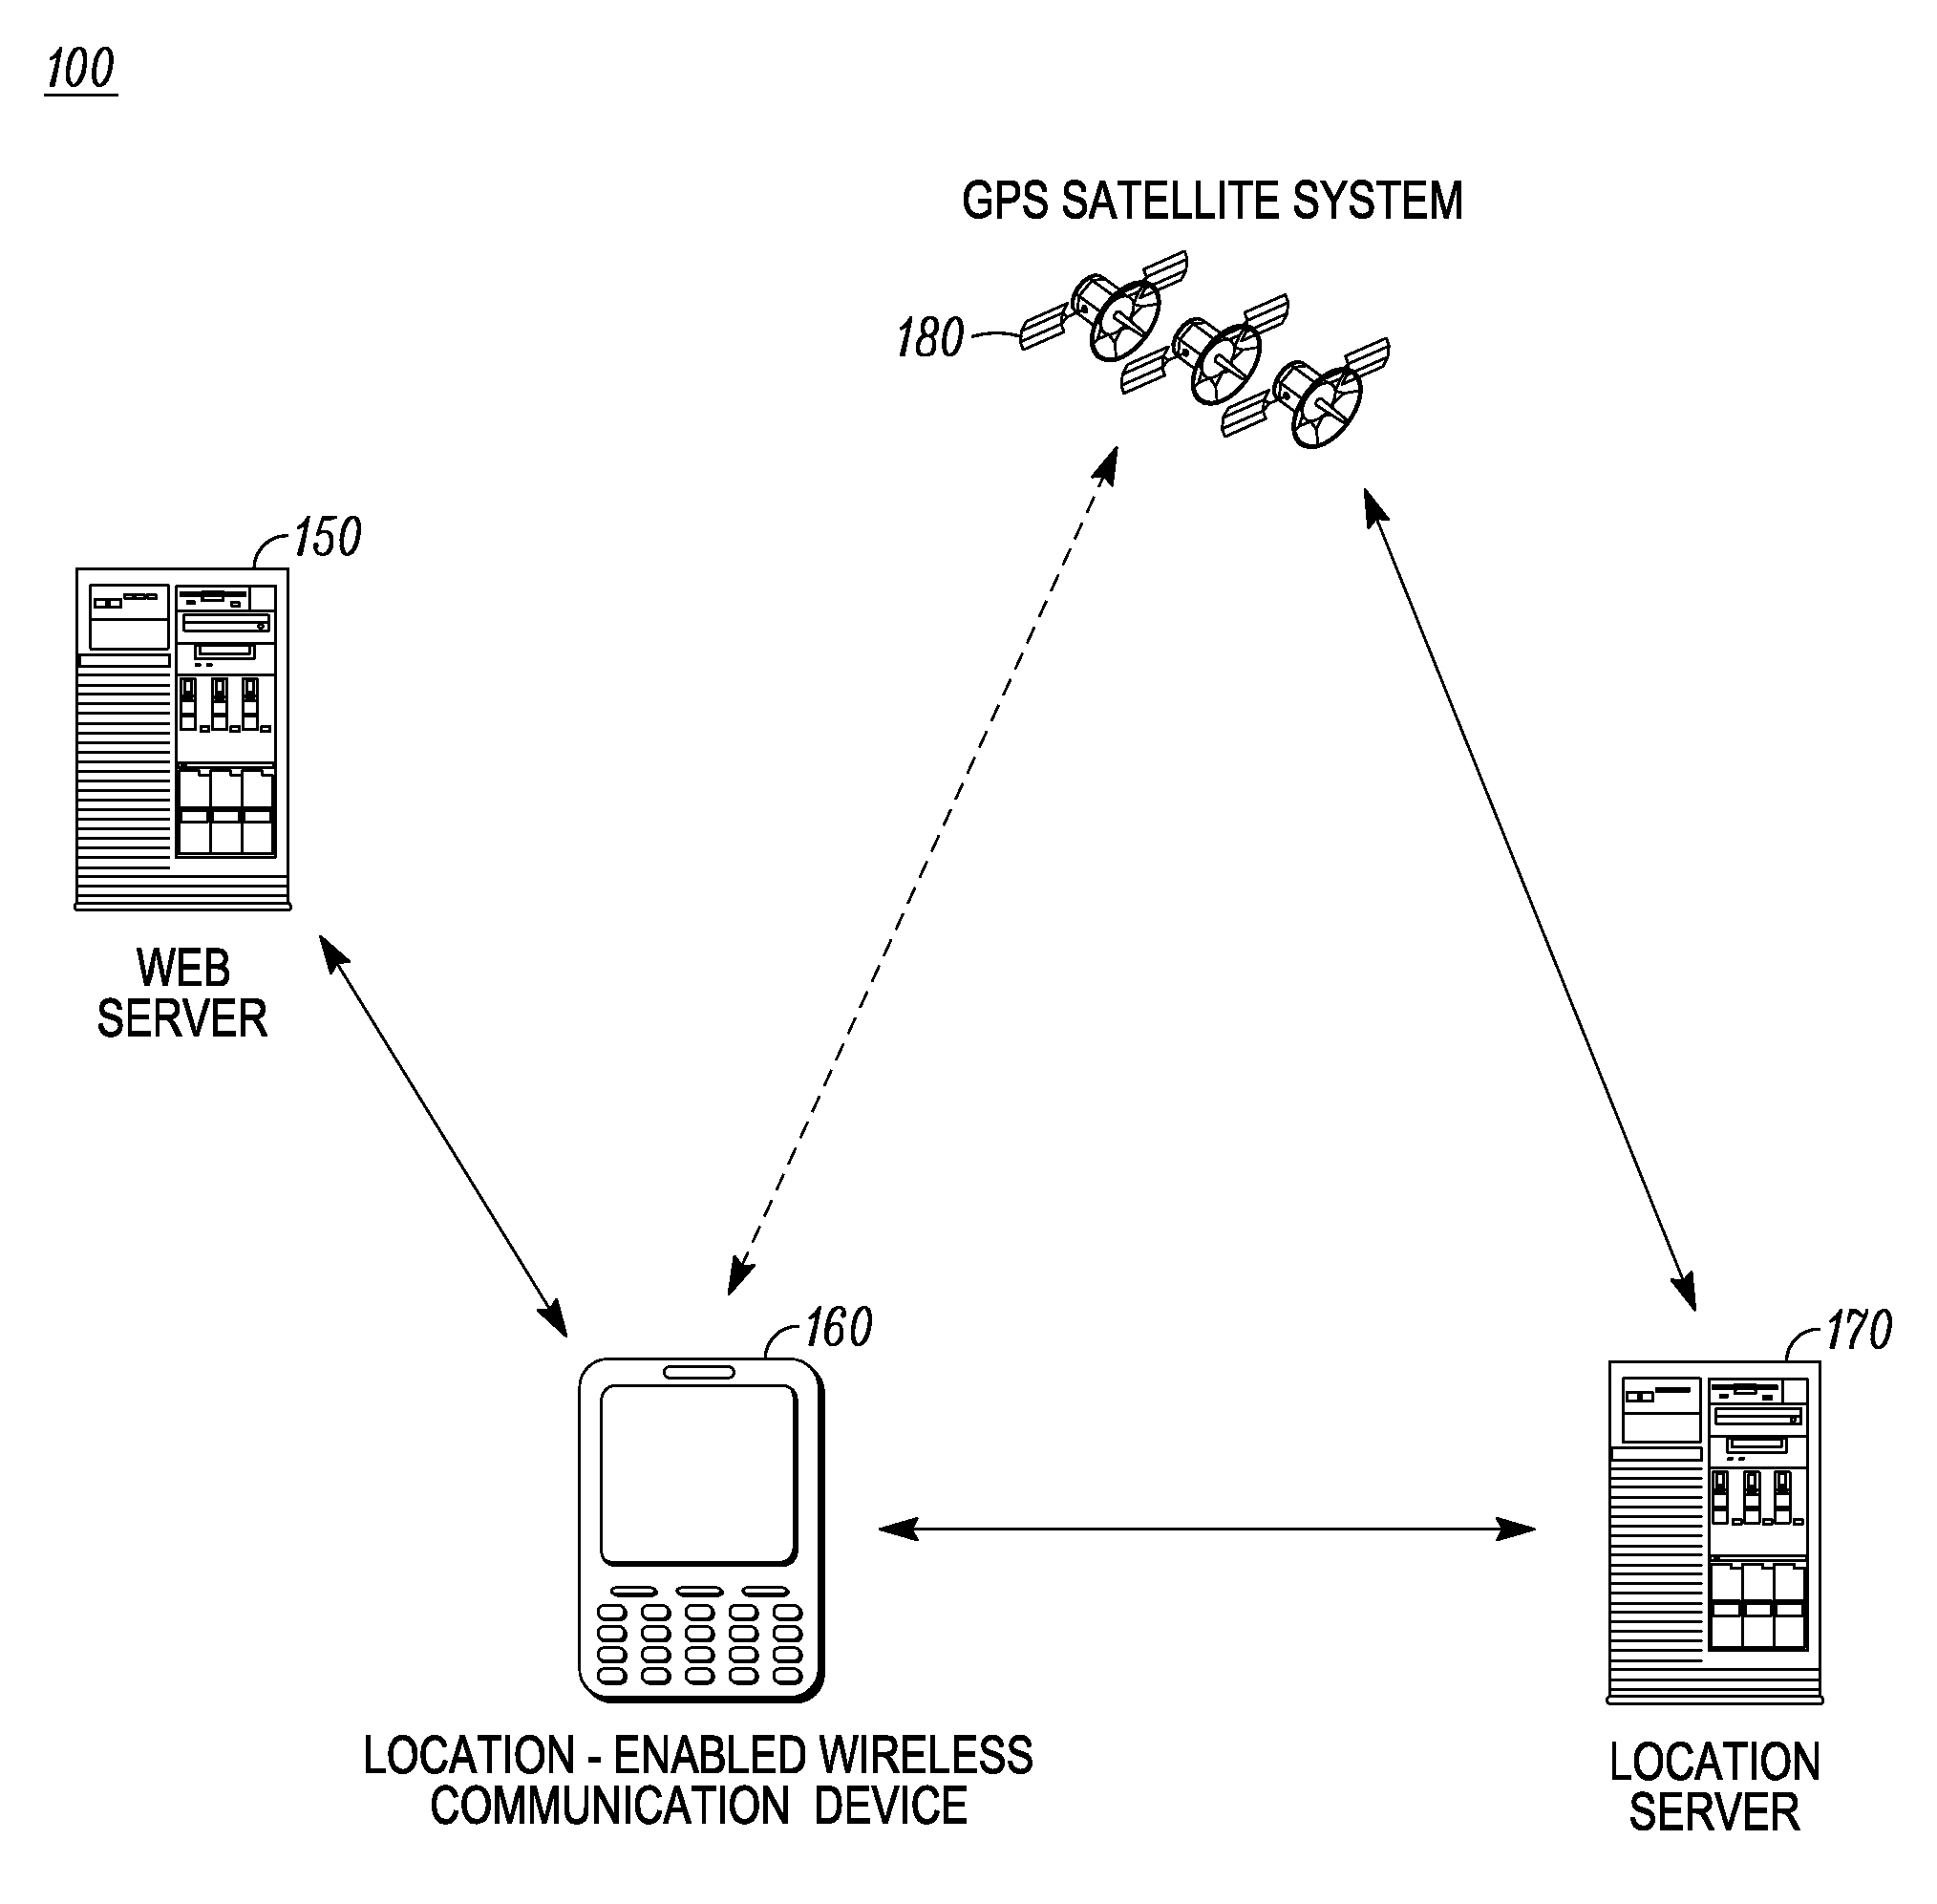 Method and Apparatus for Providing Location-Based Information